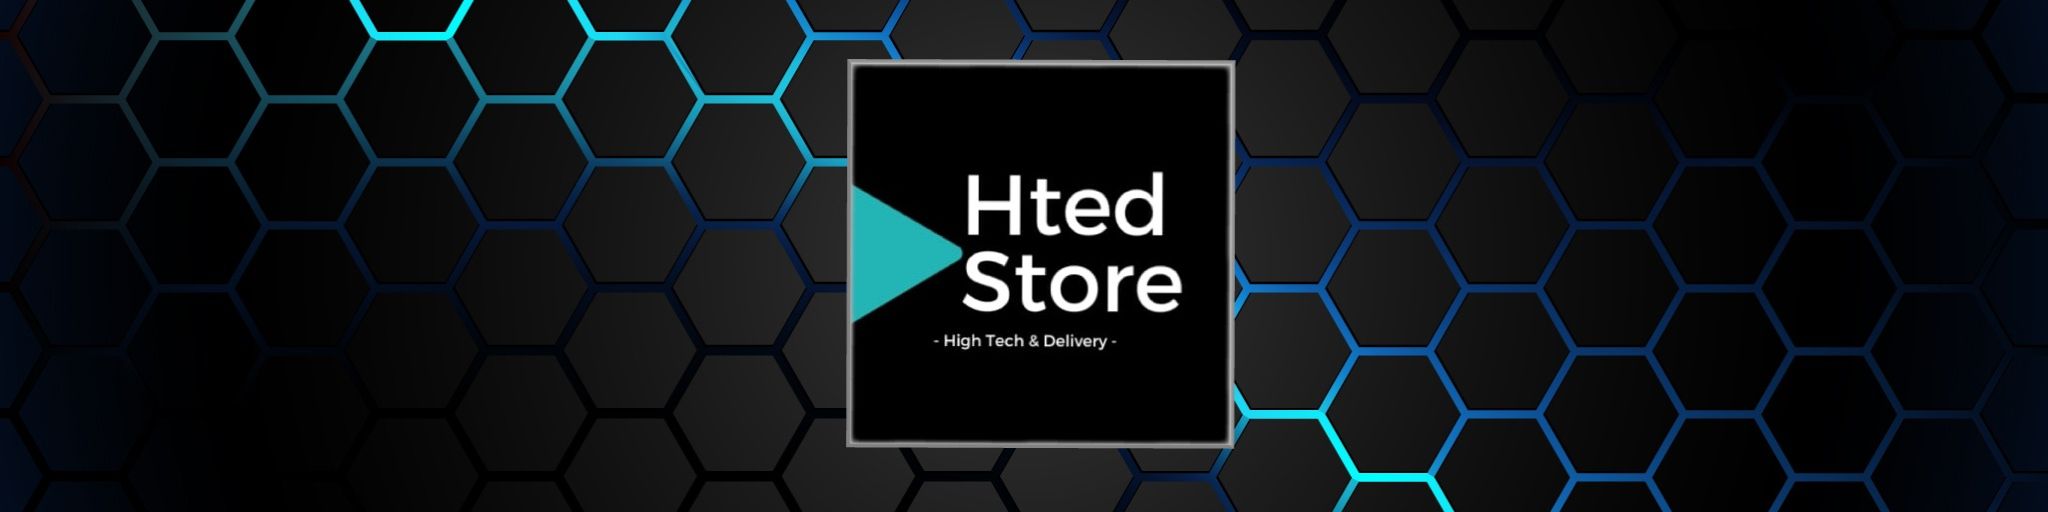 Hted Store